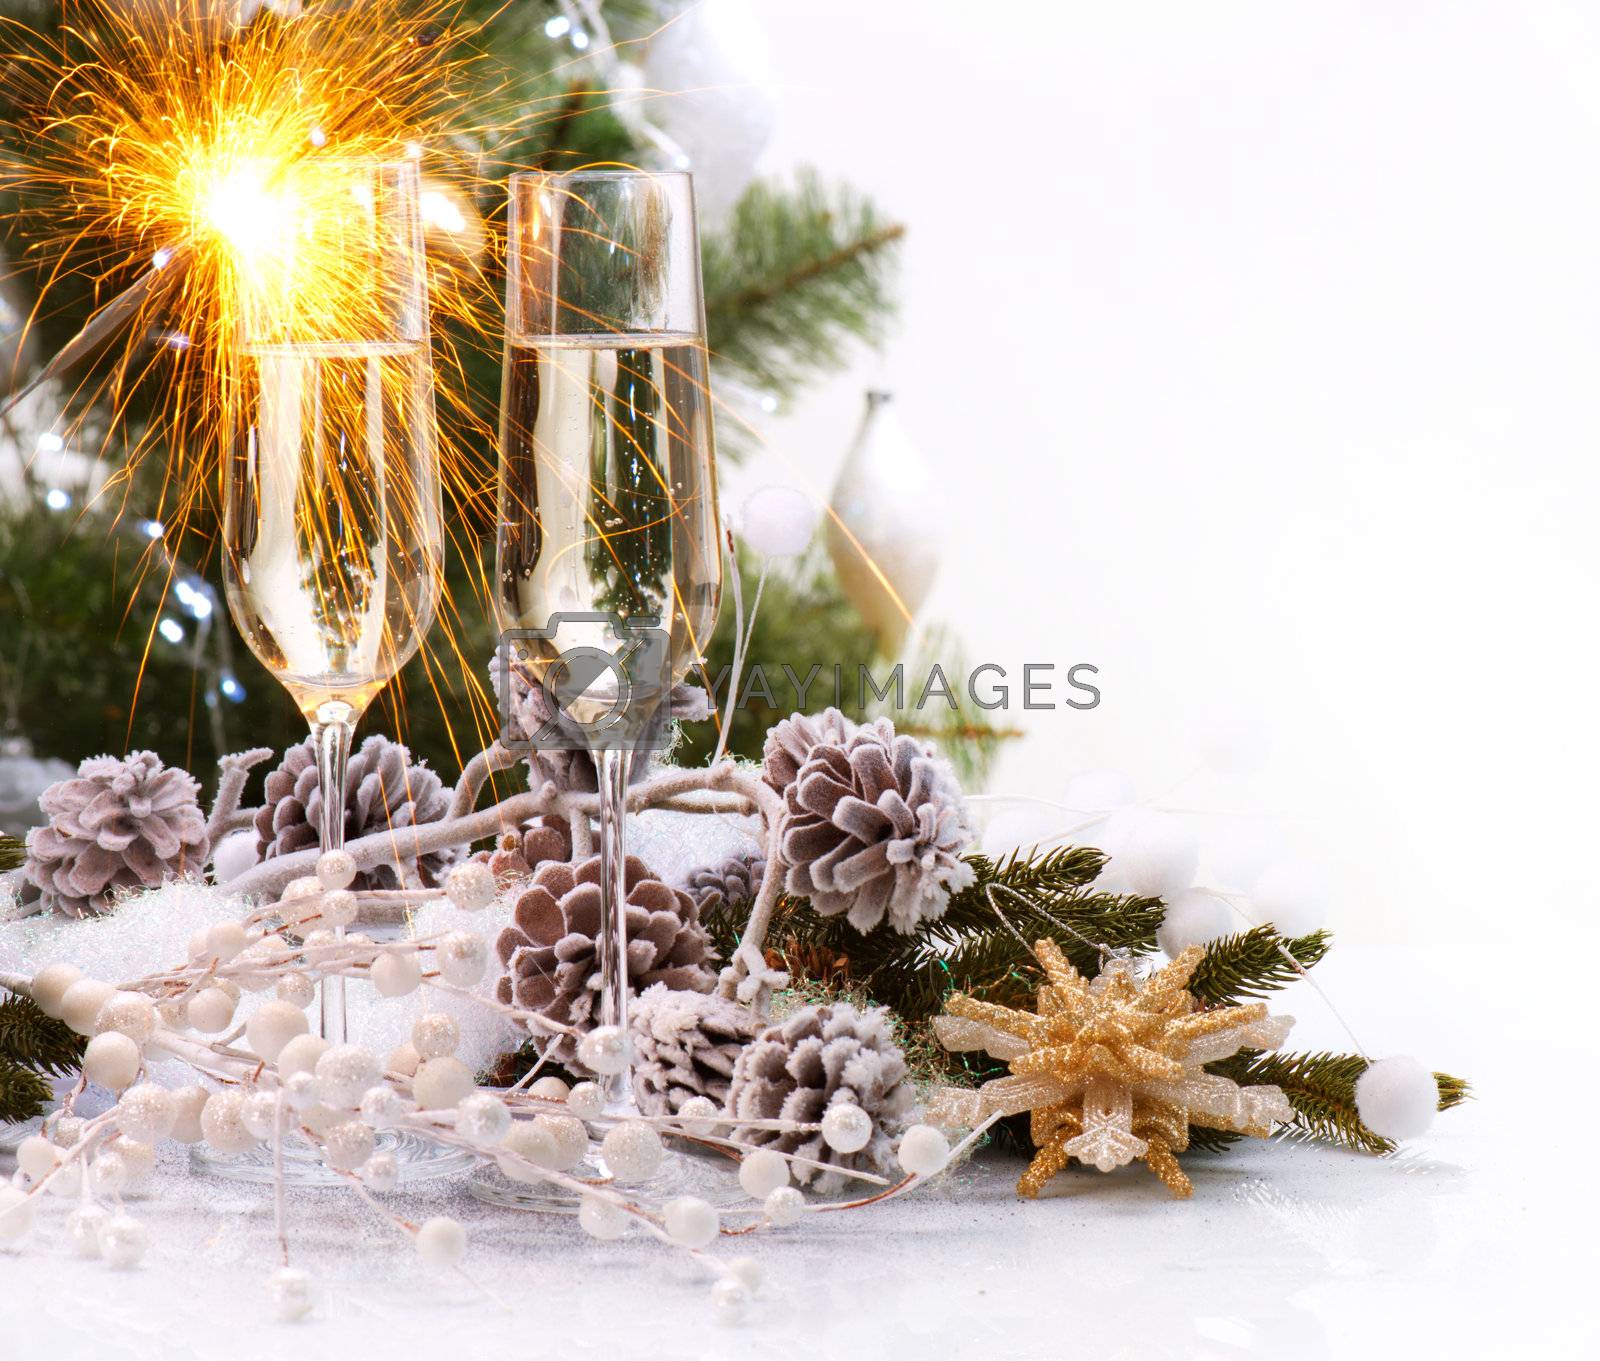 Royalty free image of Christmas Celebration with Champagne  by SubbotinaA